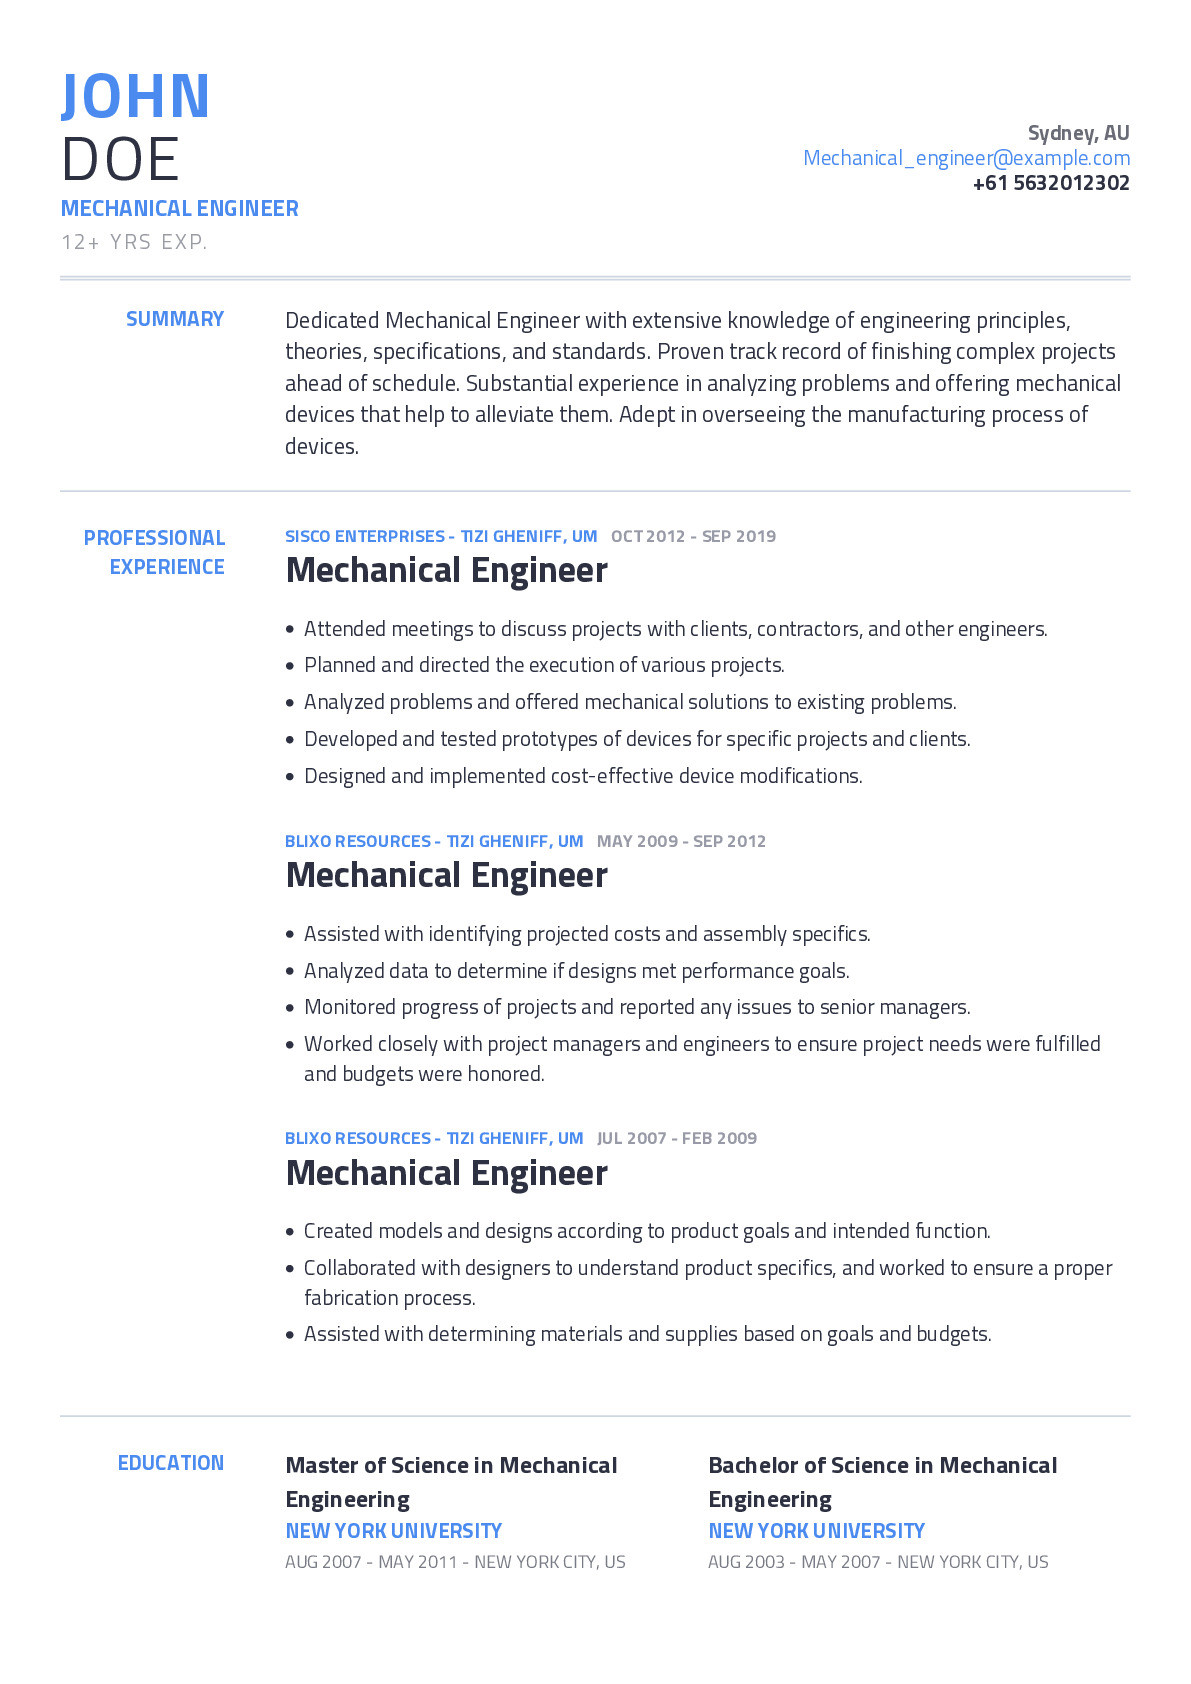 Mechanical Engineering Project Manager Resume Sample Mechanical Engineer Resume Example with Content Sample Craftmycv